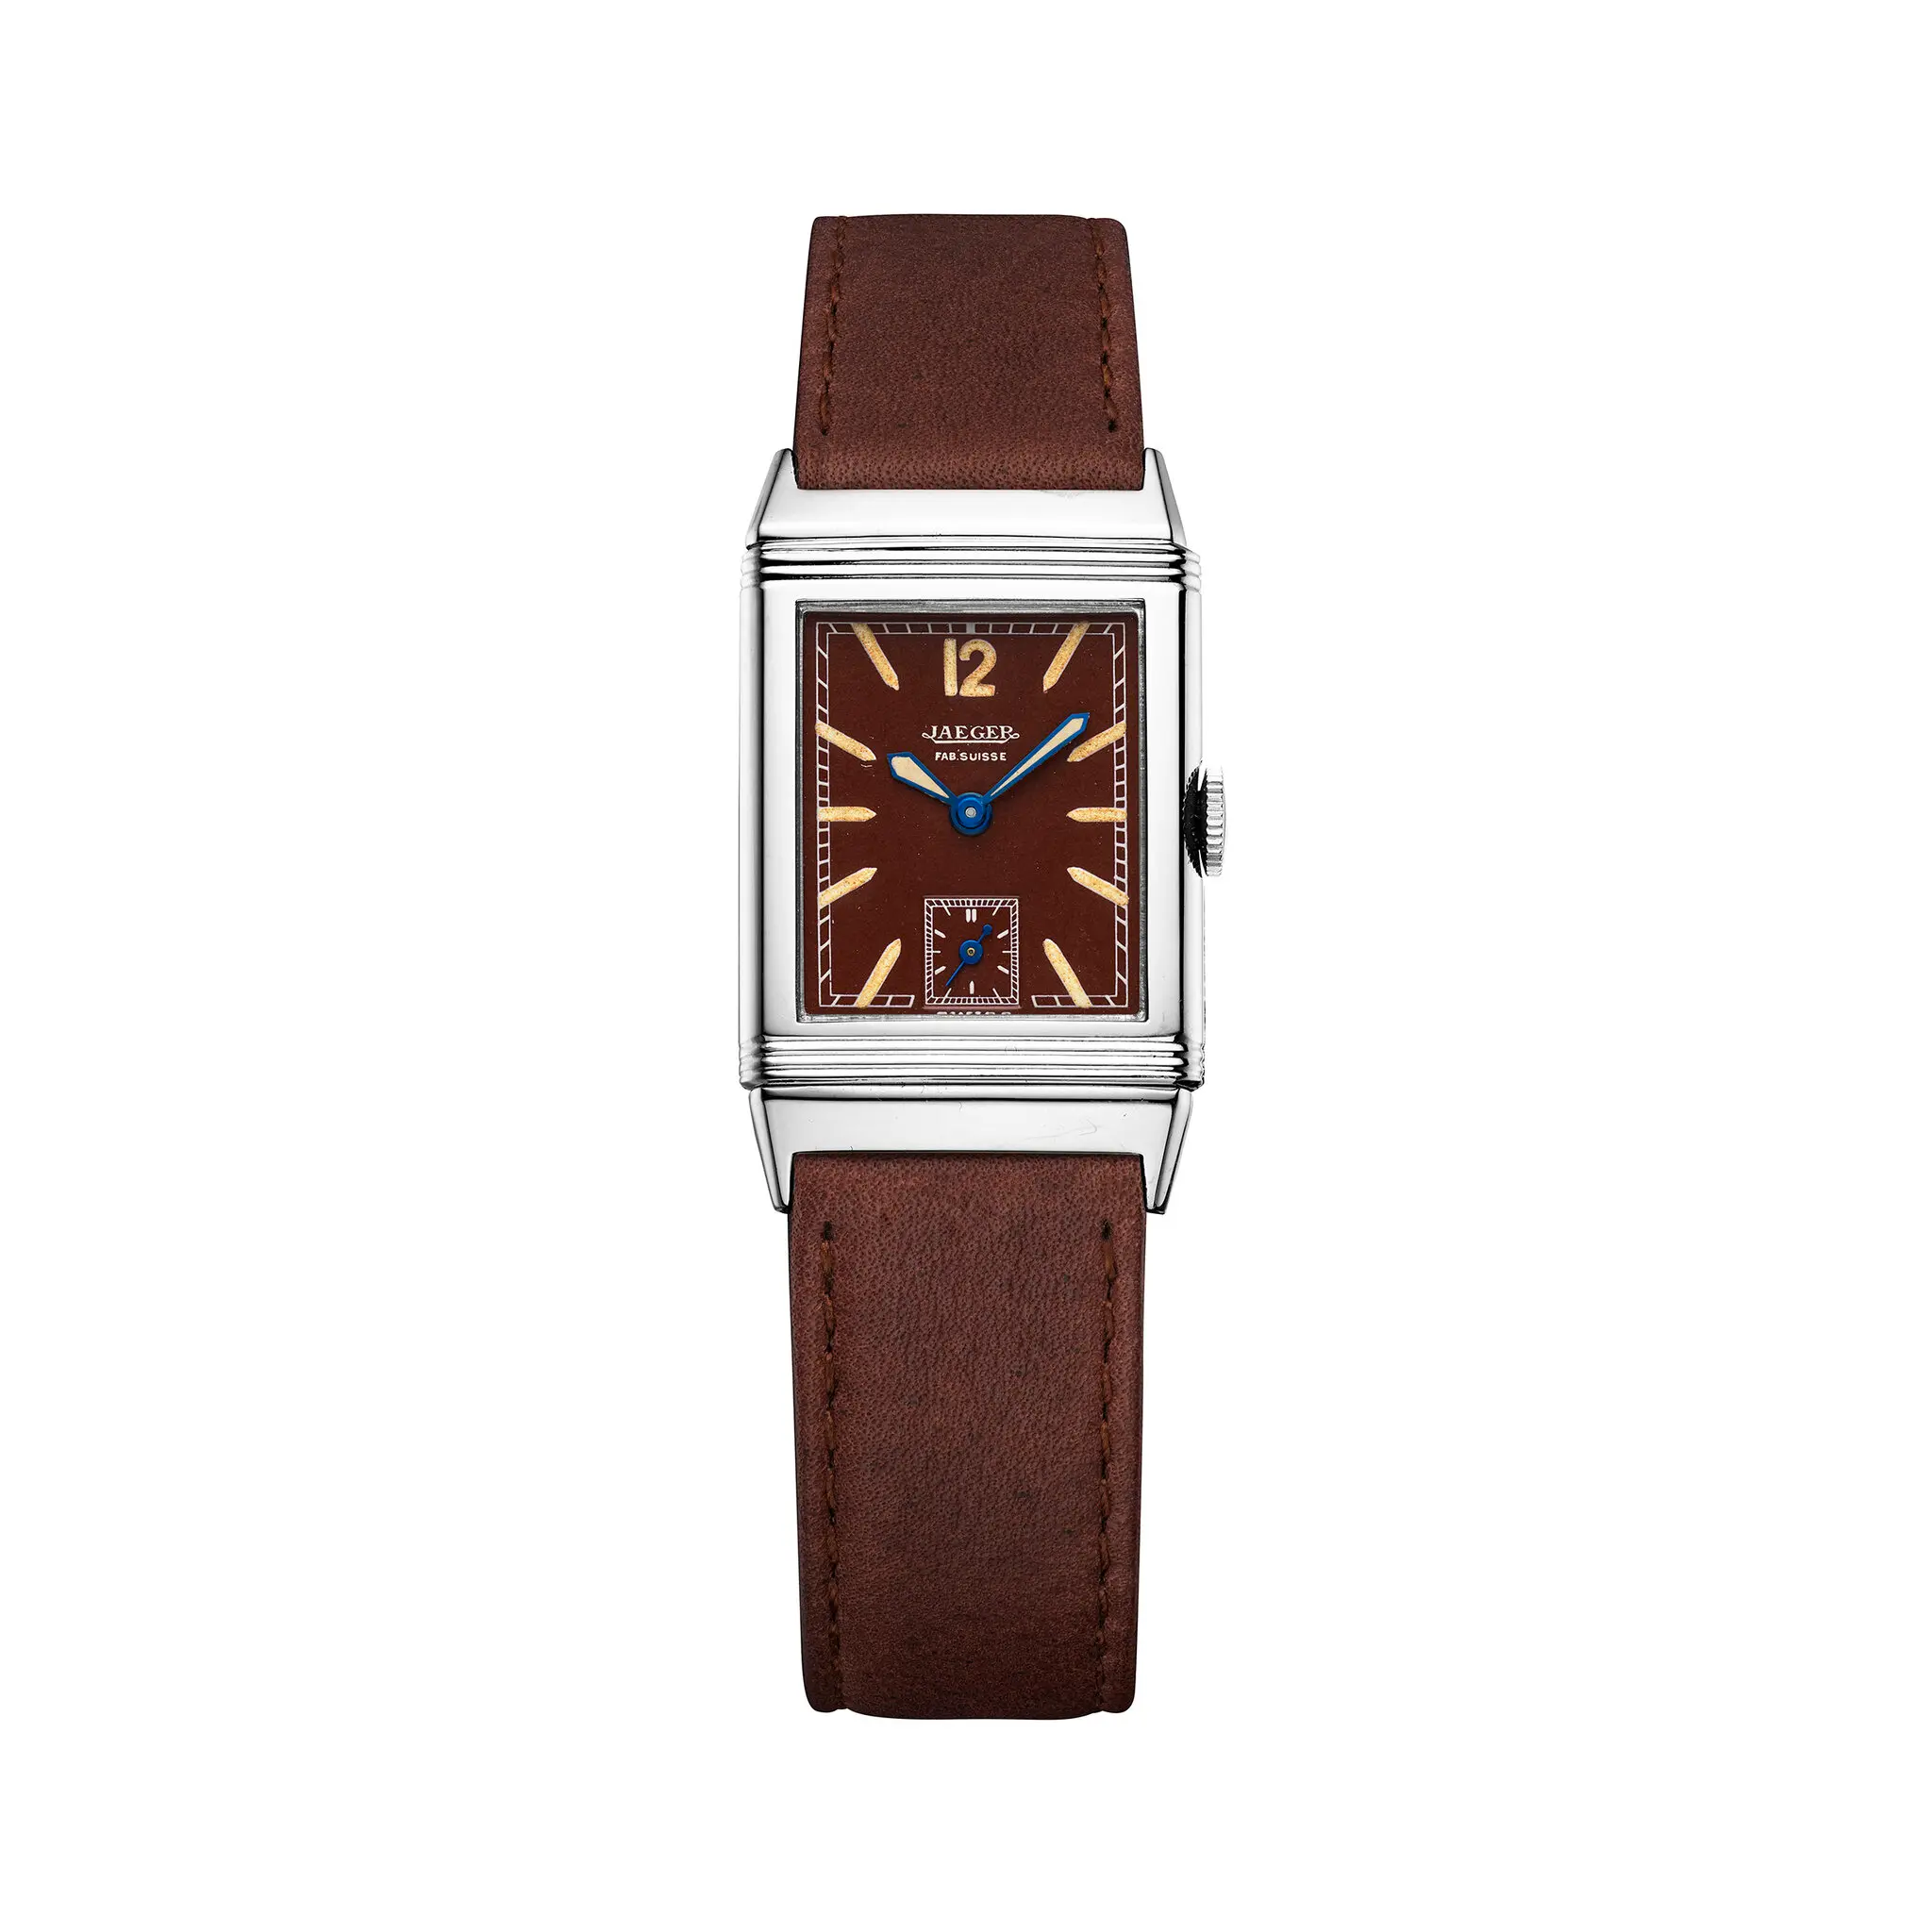 Vintage Is the Focus of a New Watch Line